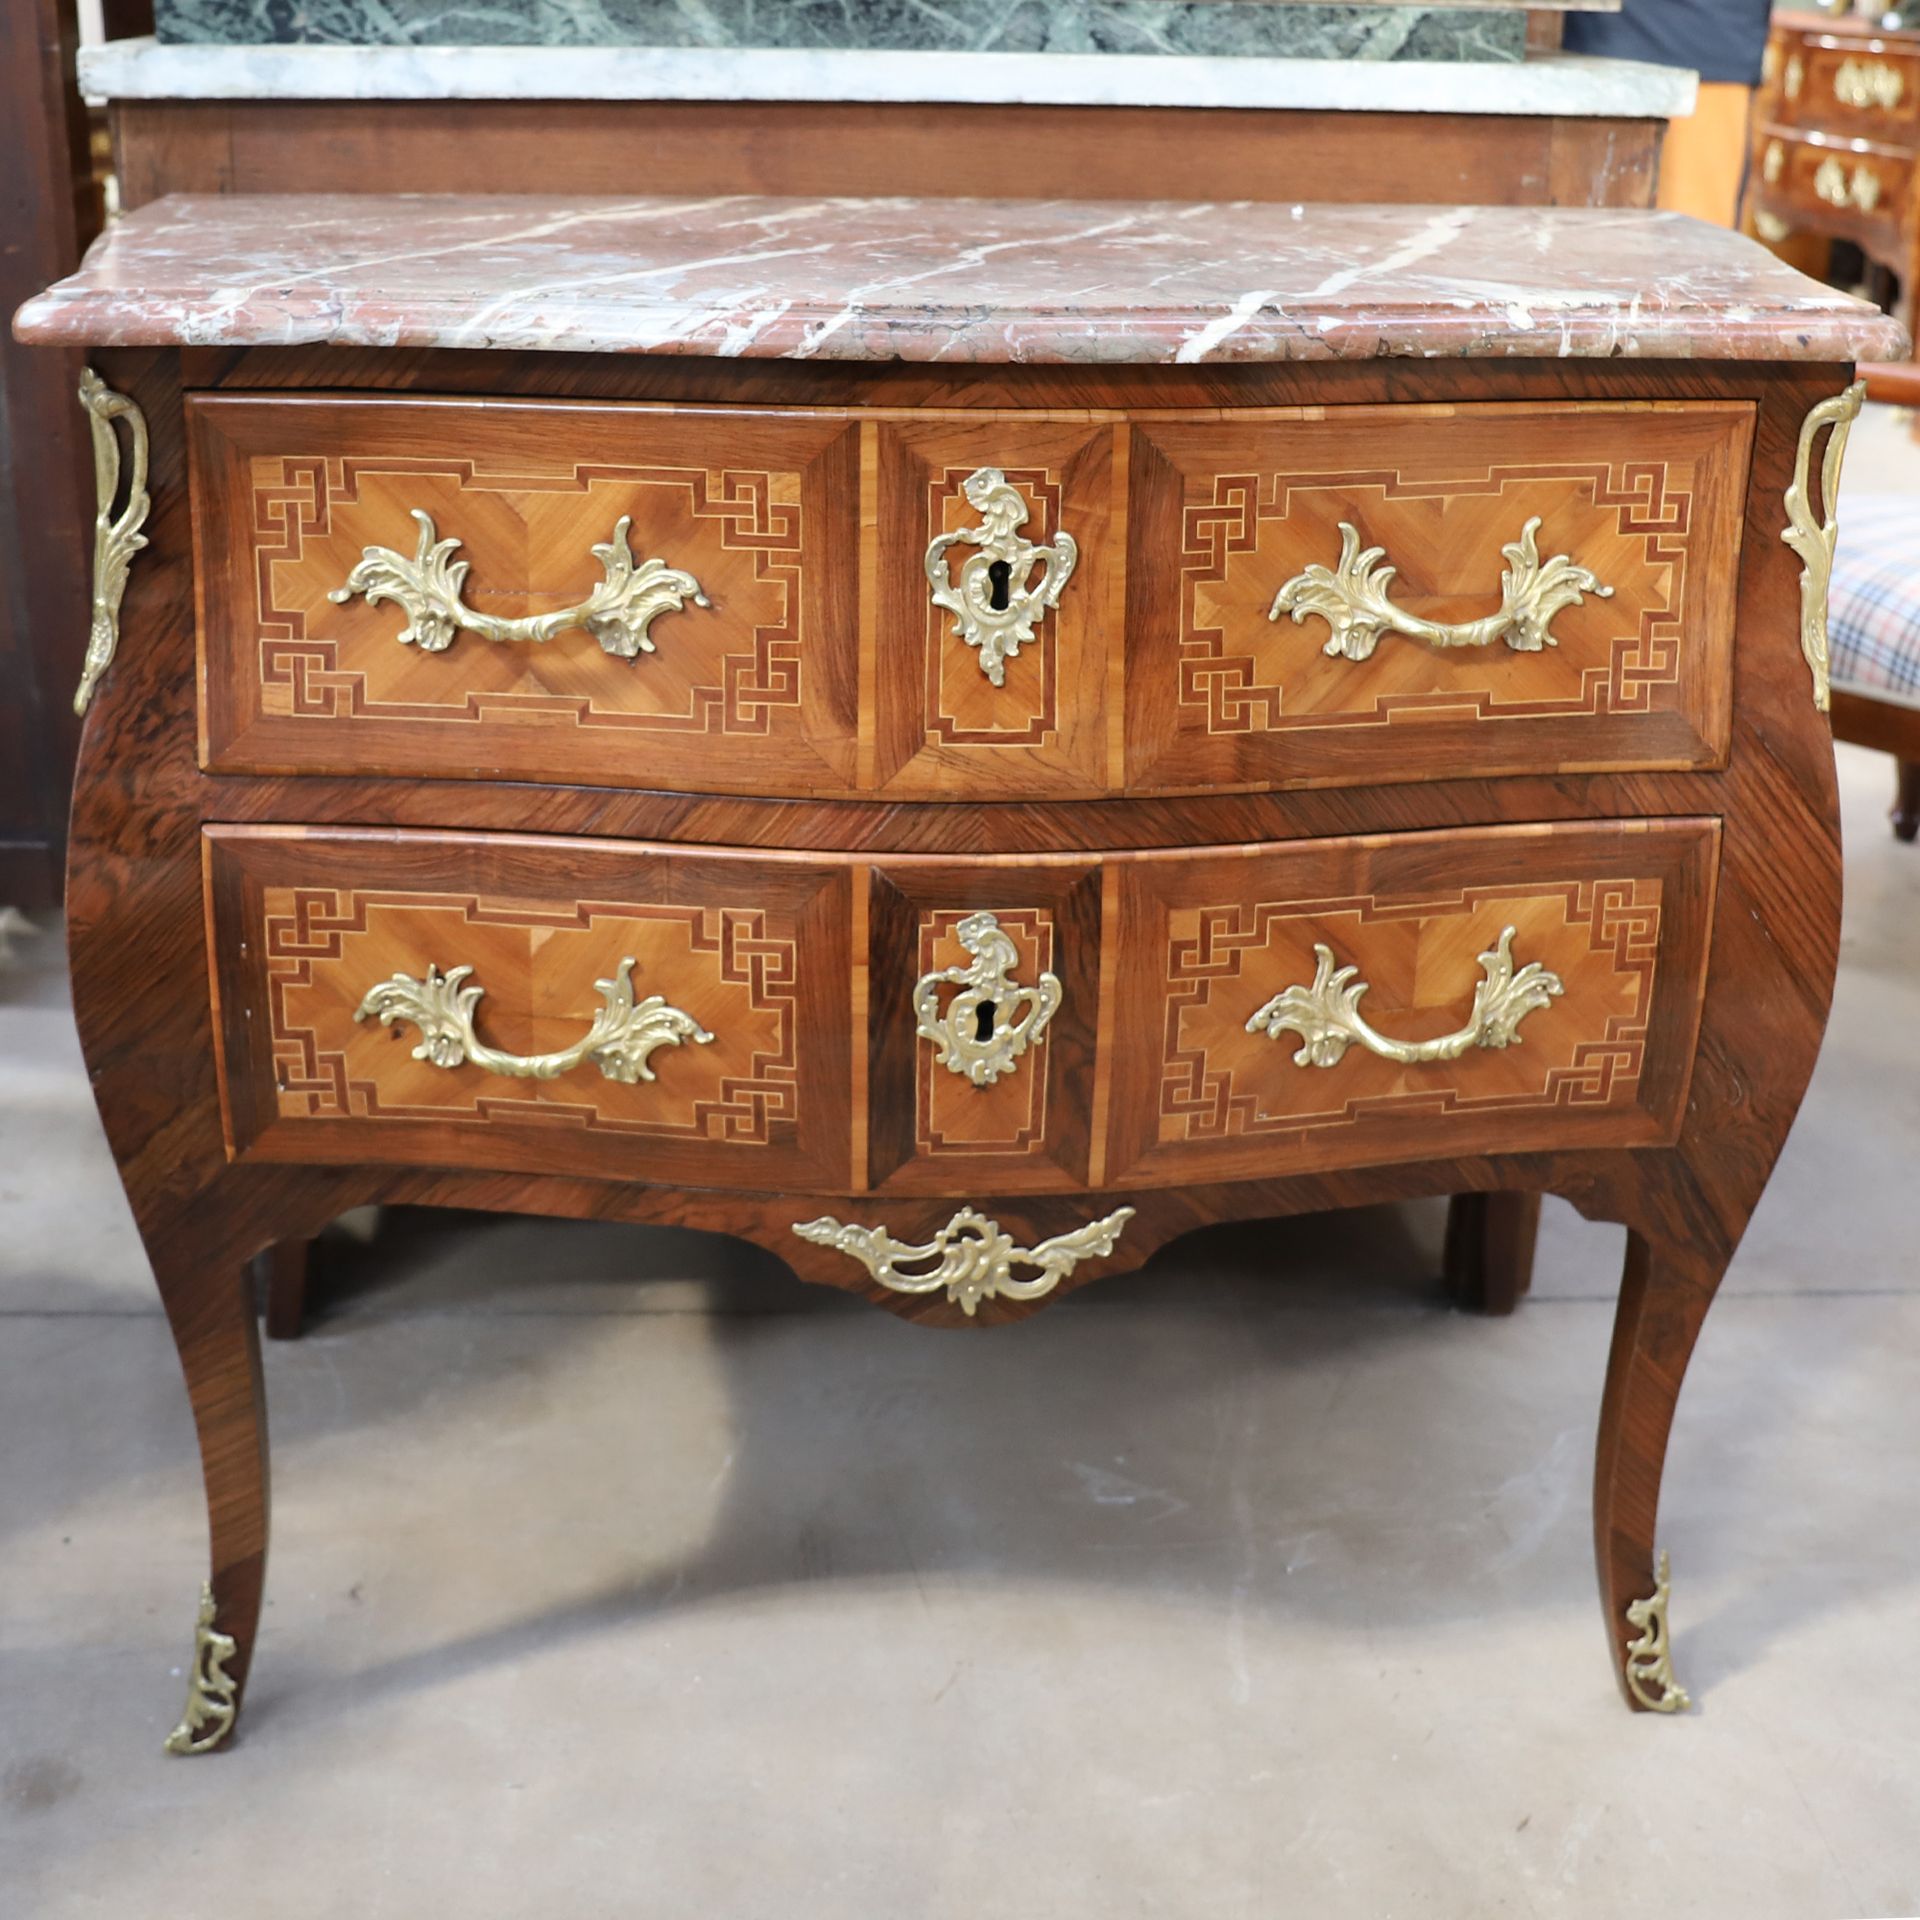 Null SMALL COMMODE JUMPER LOUIS XV

Opening by two drawers in front of the geome&hellip;